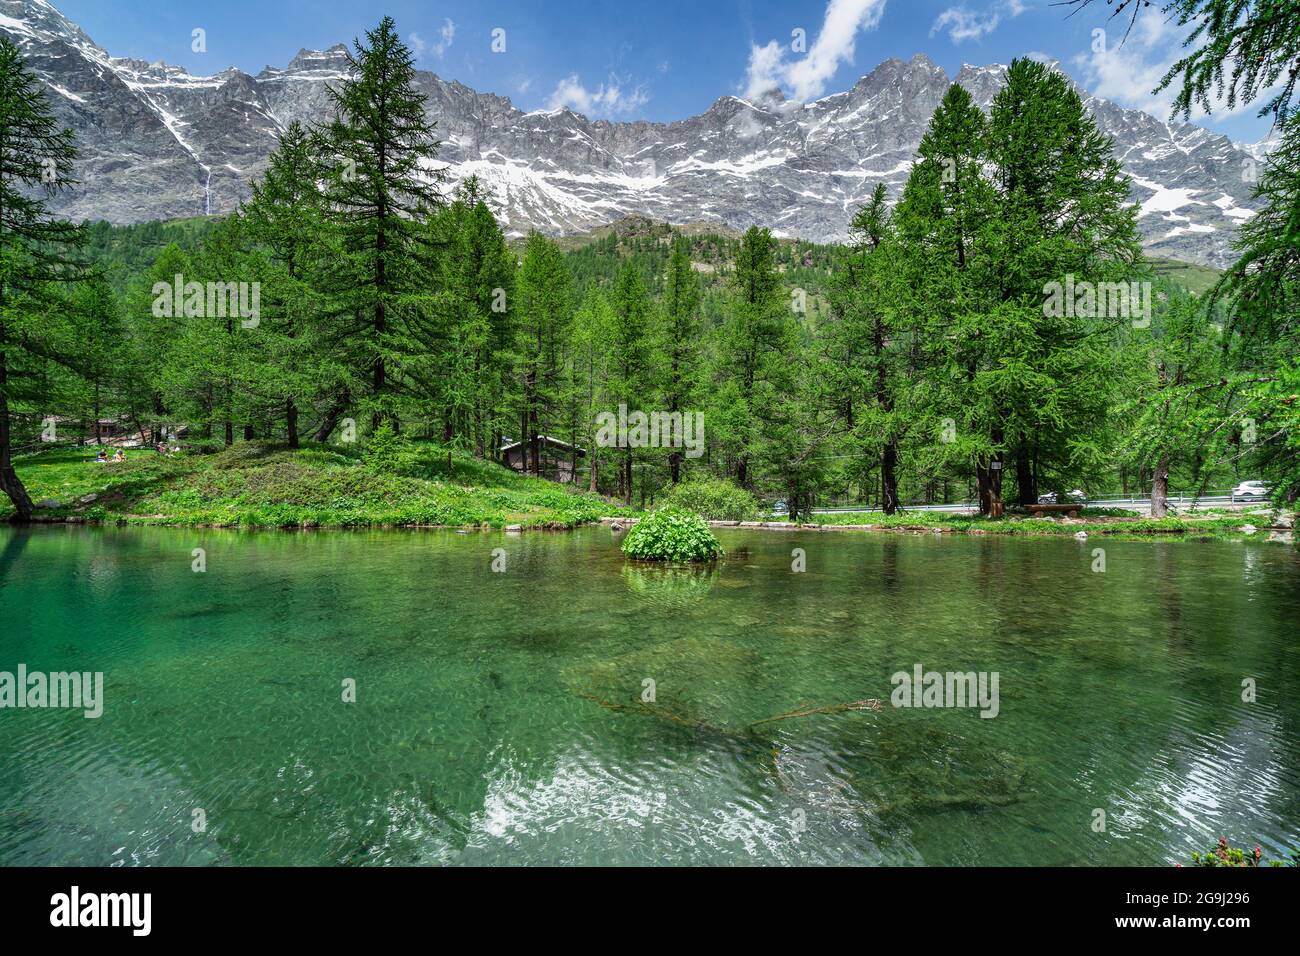 The scenic Blue Lake (Lago Blu) surrounded by a beautiful alpine landscape near Cervinia, Aosta Valley, Italy Stock Photo